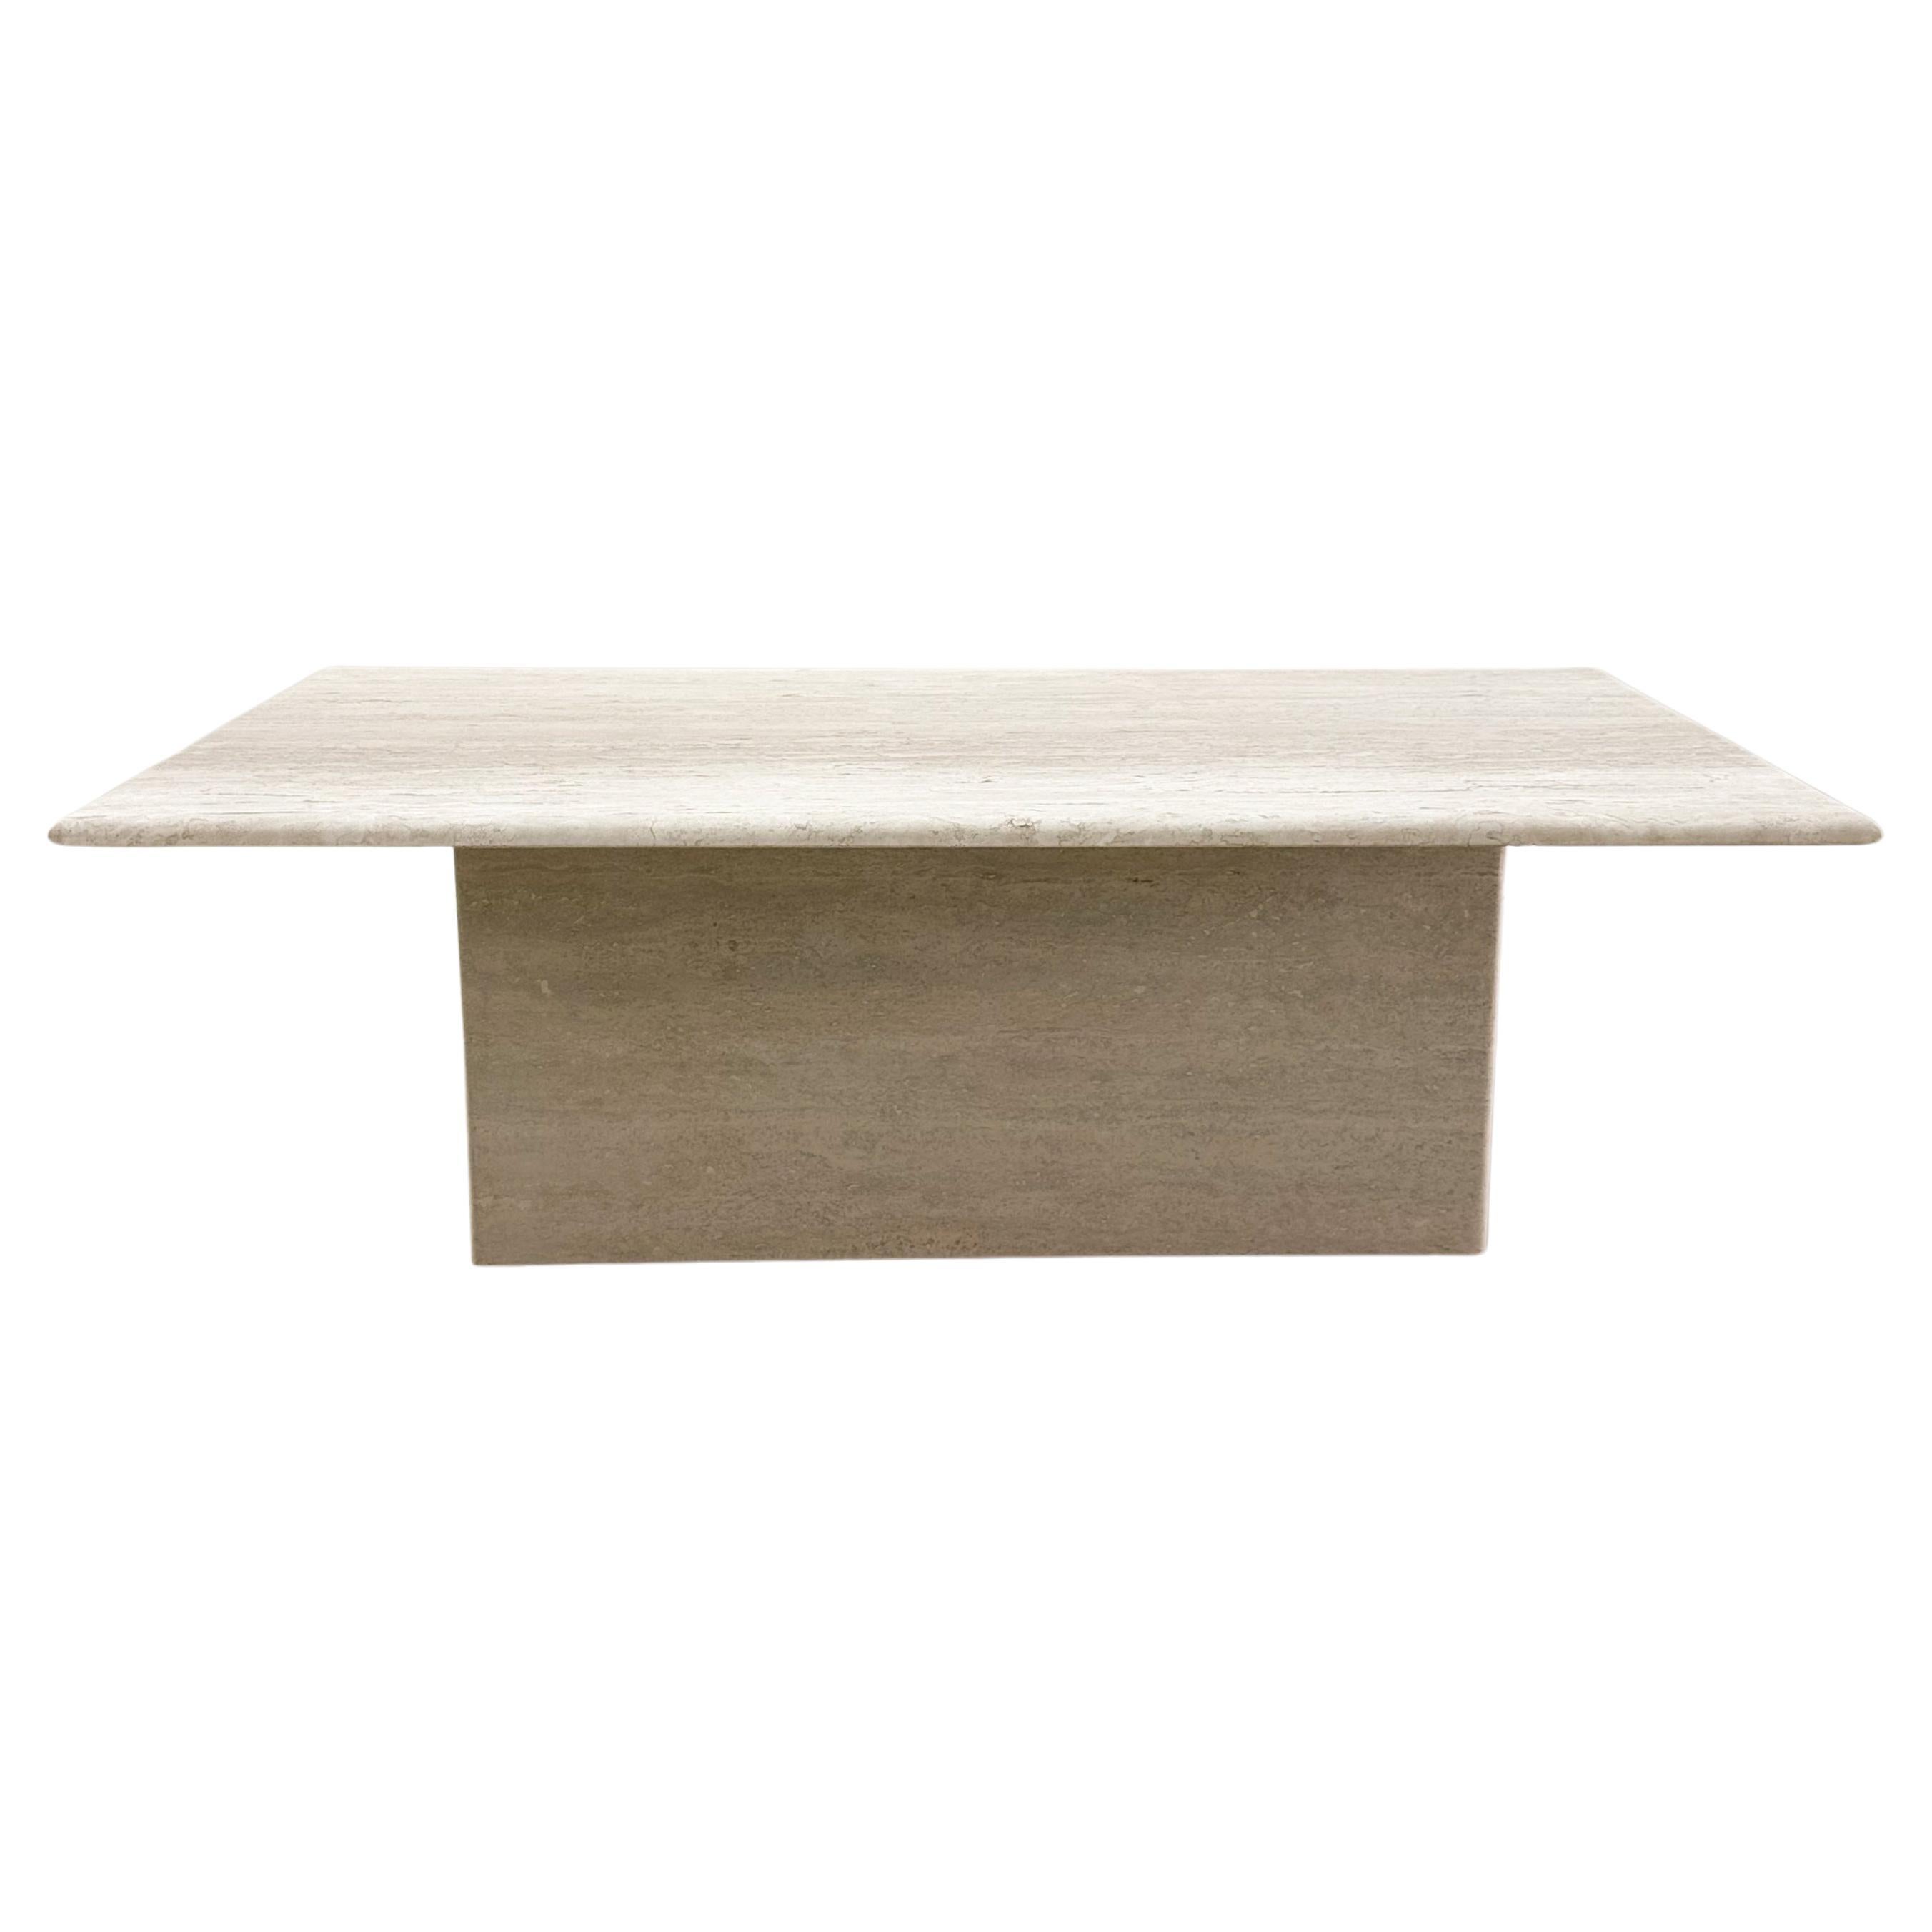 Vintage Rectangle Travertine Stone Coffee Table Marble Postmodern MCM Retro  For Sale